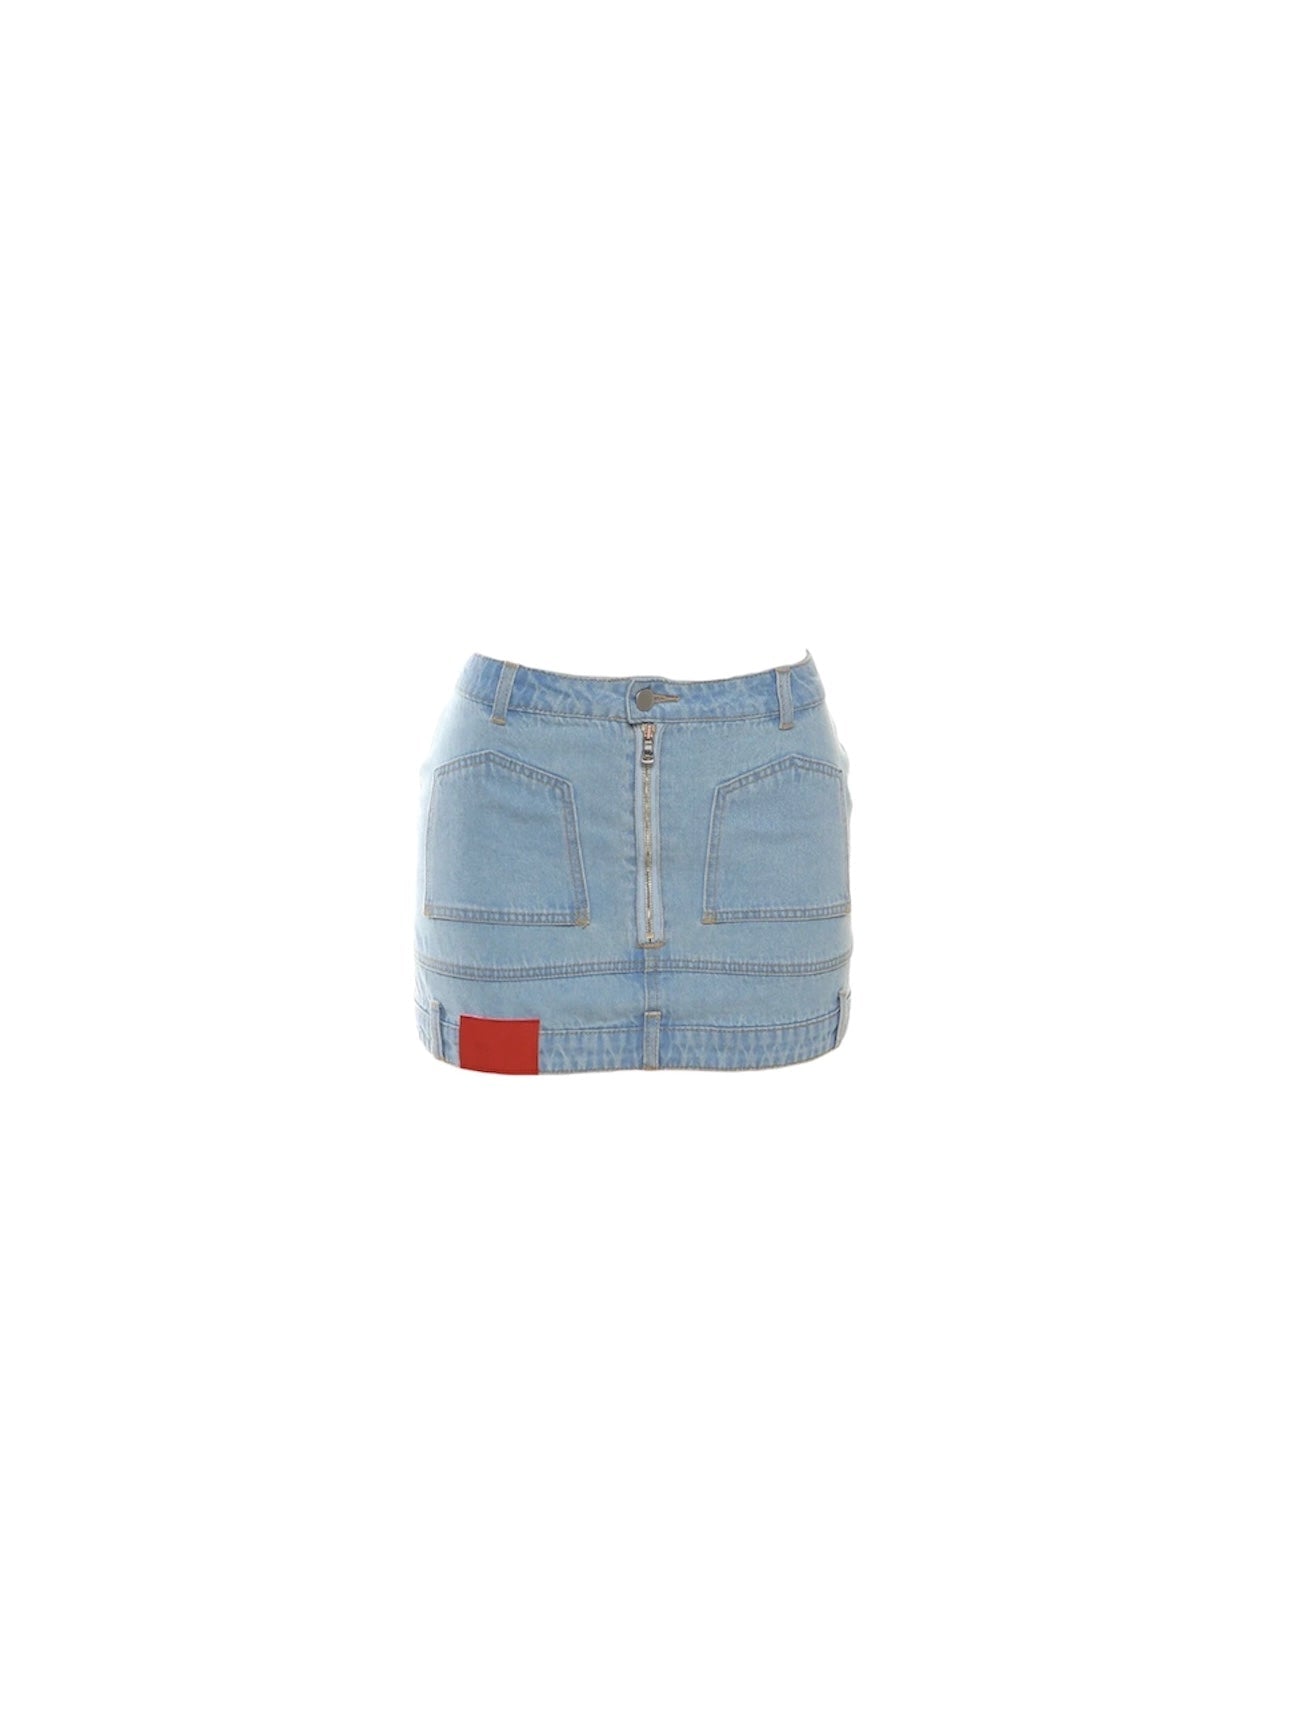 Out Of Pocket Denim Mini Skirt - Dezired Beauty Boutique